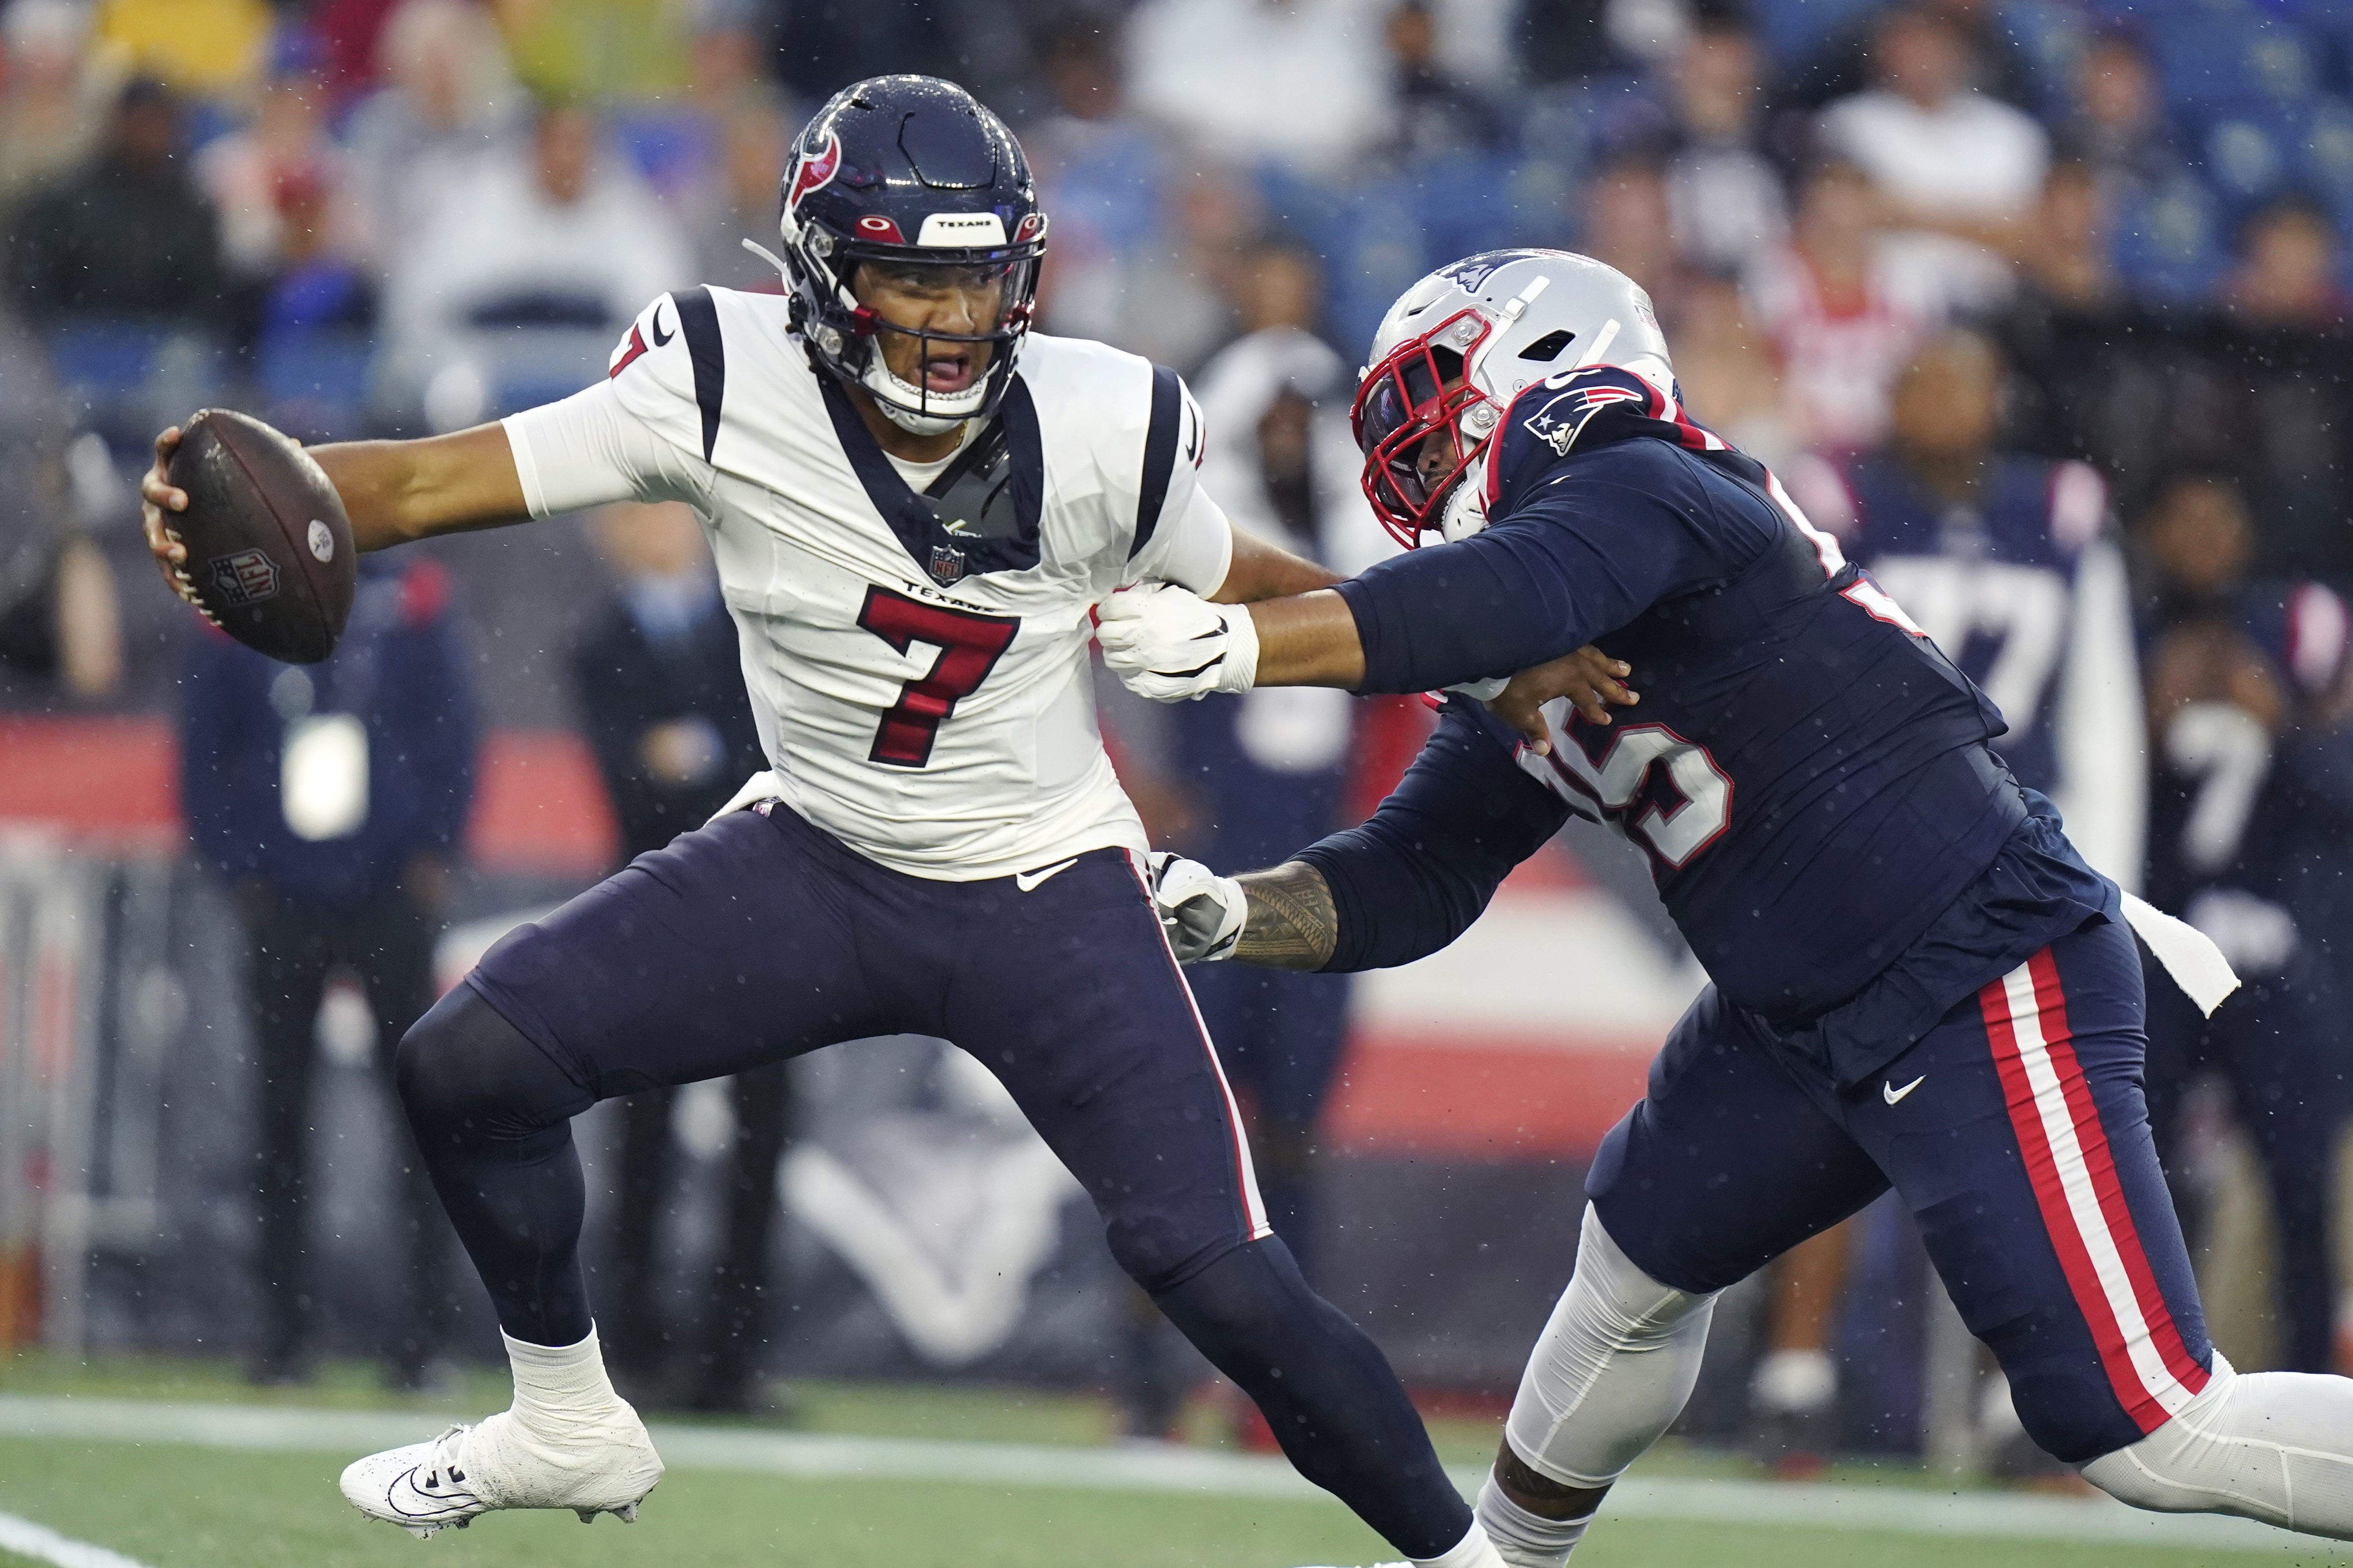 Meet Houston Texans quarterback C.J. Stroud, drafted in the first